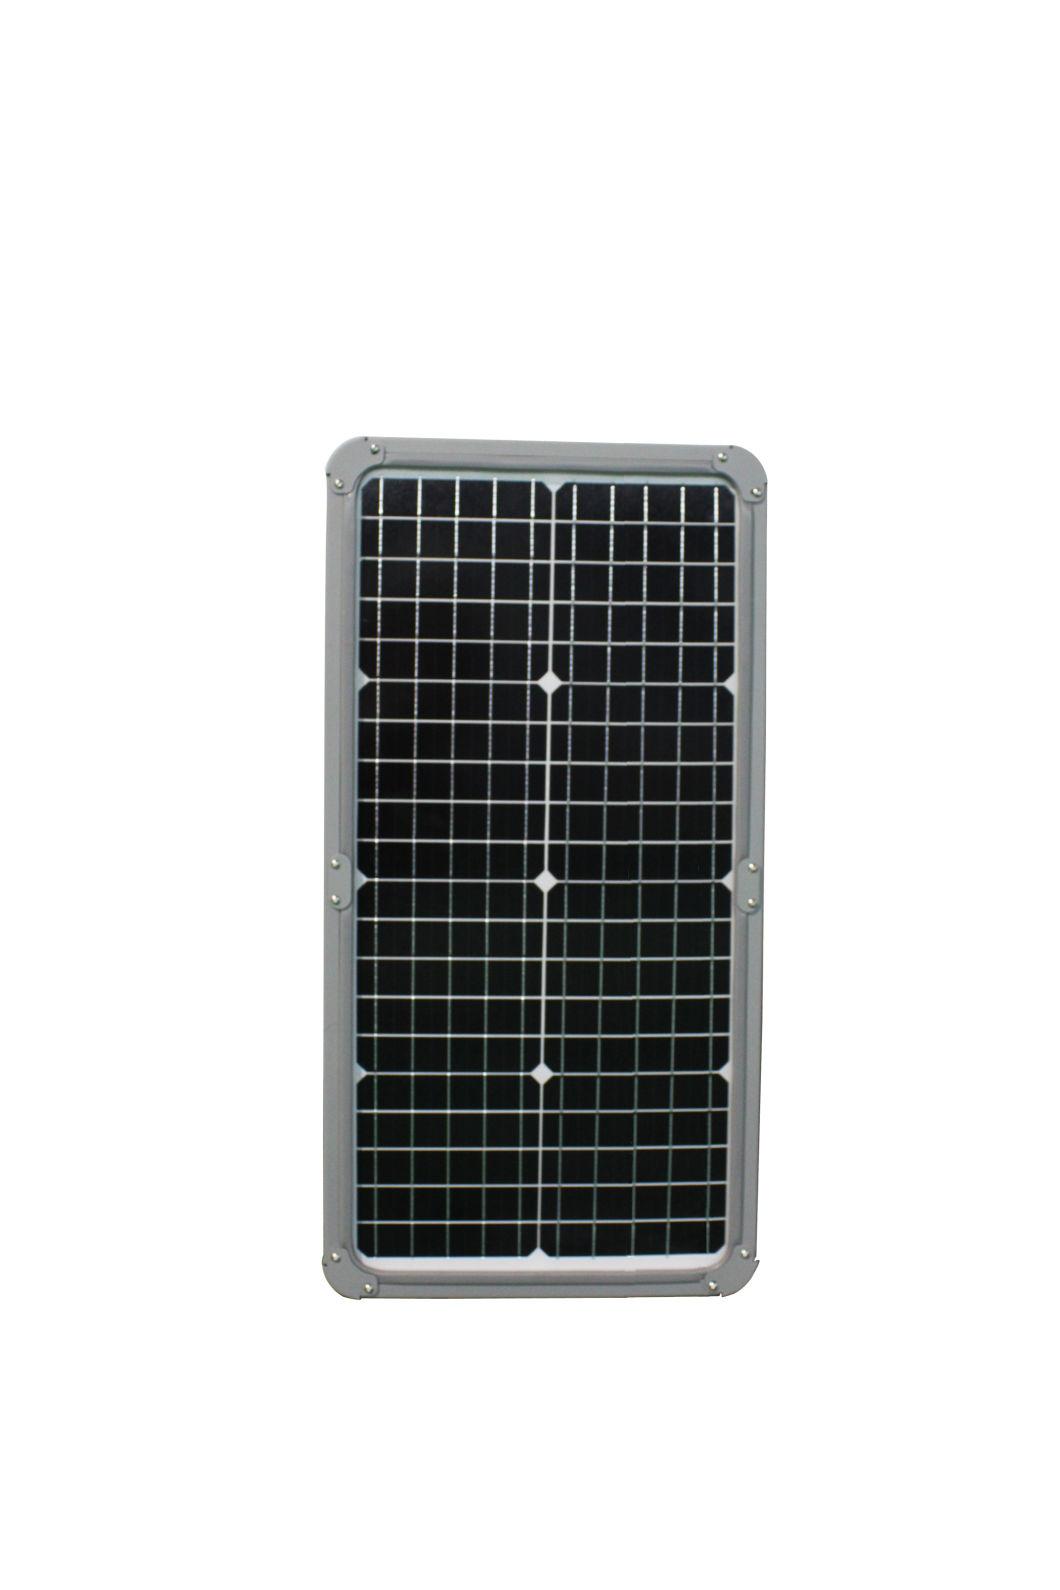 China Manufacturer IP66 Waterproof All in One Solar 150W Power Integrated LED Street Light